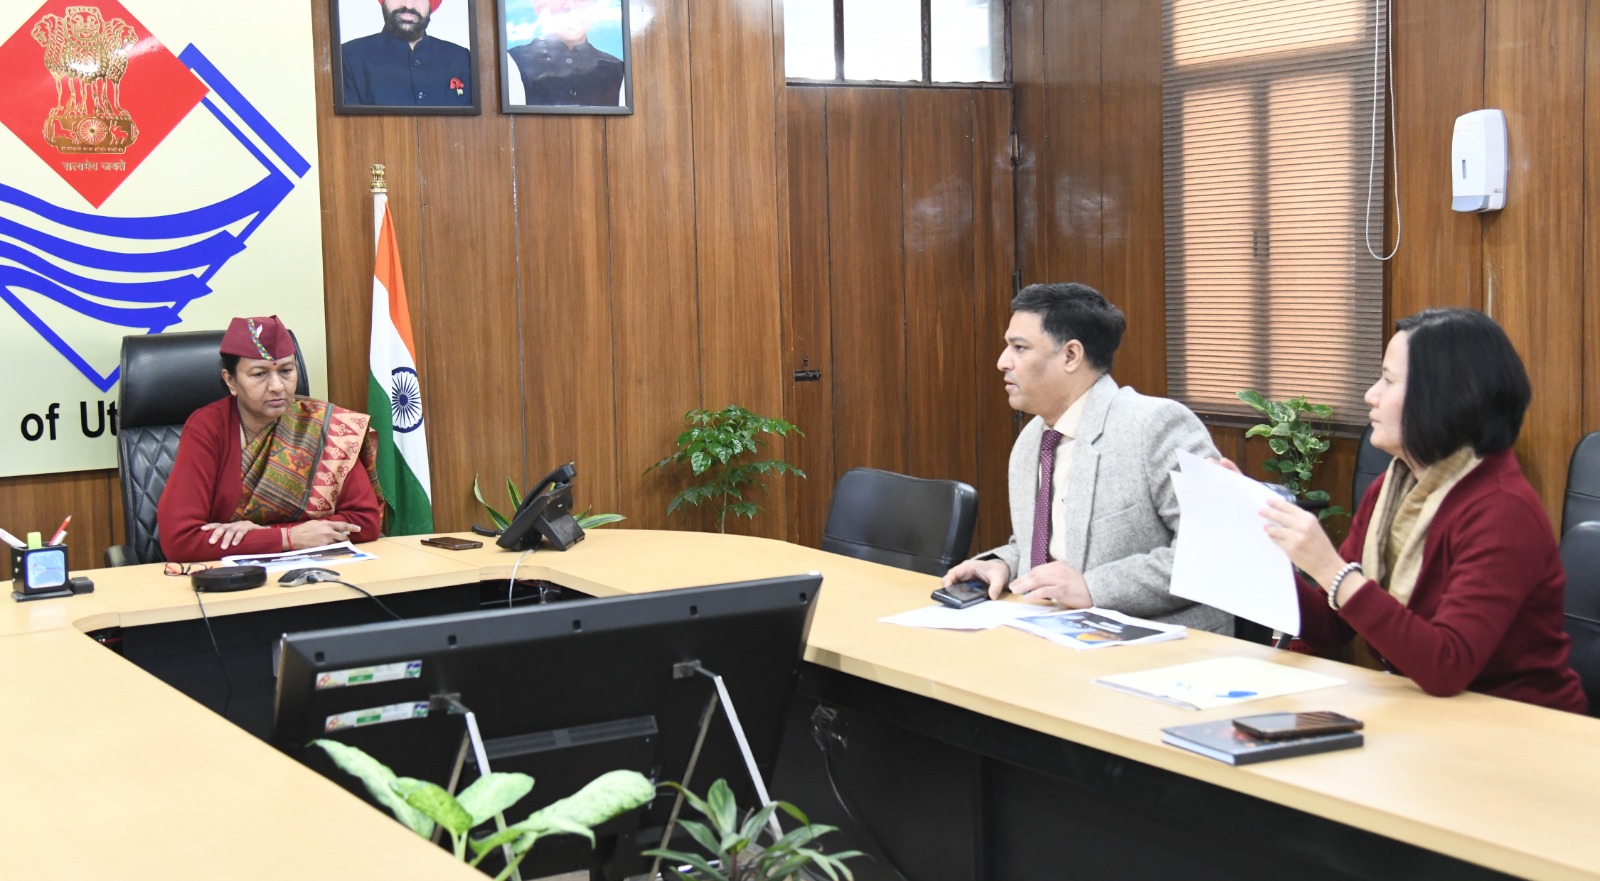 Chief Secretary gave instructions to strengthen tourist facilities and connectivity in Adi Kailash